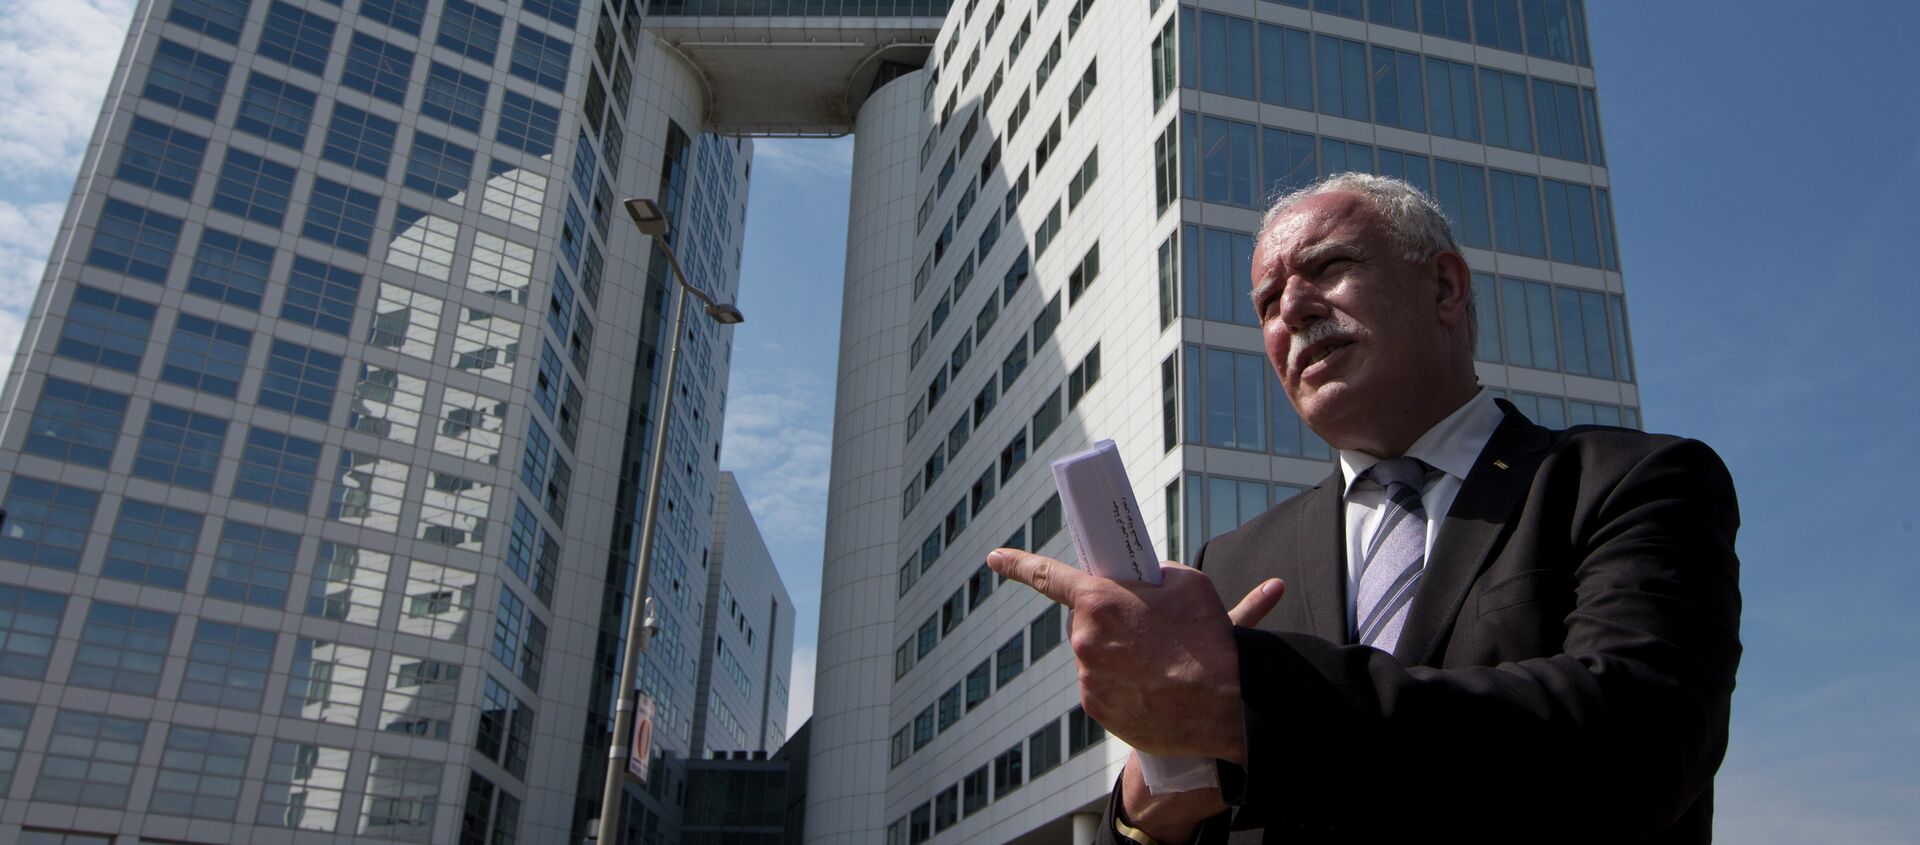 Palestinian Foreign Minister Riyad Al-Maliki waits to give an interview outside the International Criminal Court, rear, in The Hague, Netherlands, Thursday, June 25, 2015 - Sputnik International, 1920, 21.03.2021